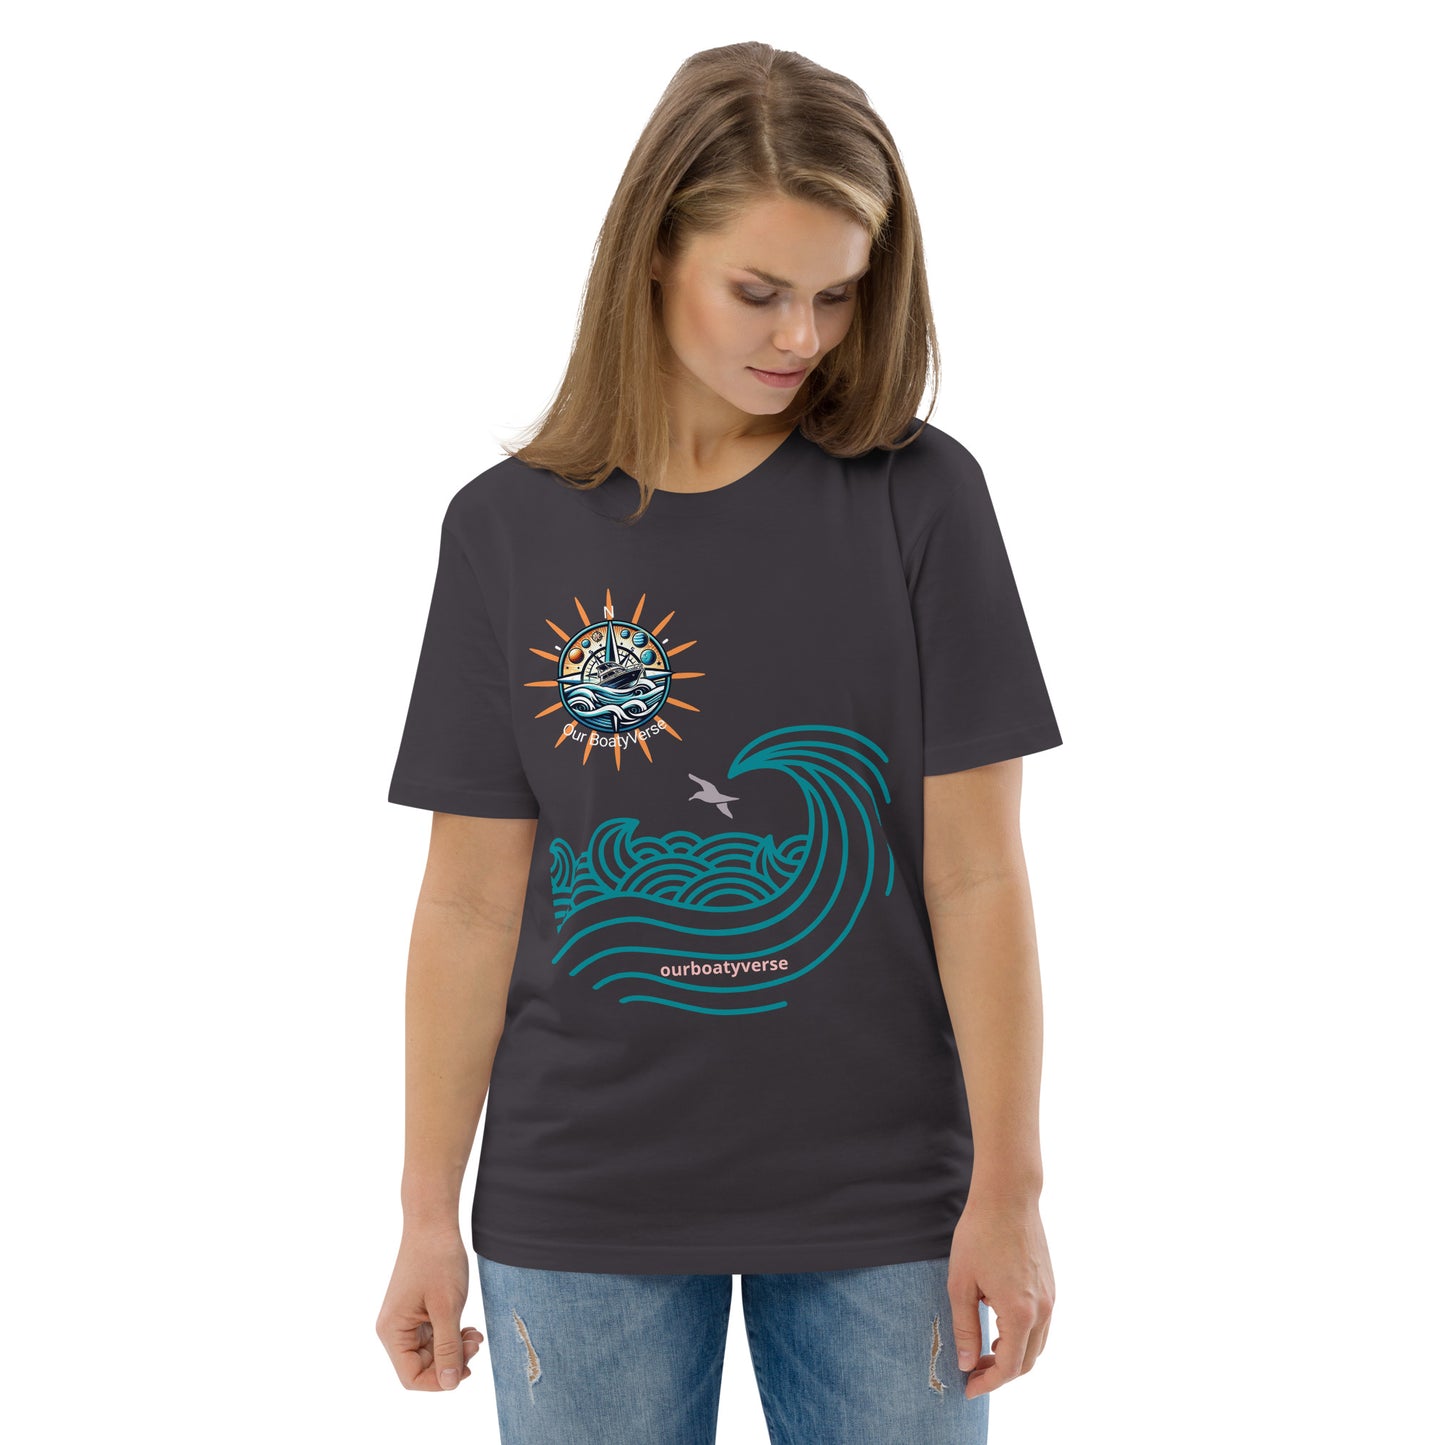 Women's Sun, Sea and Waves Organic, Eco Friendly cotton T-shirt by Our BoatyVerse